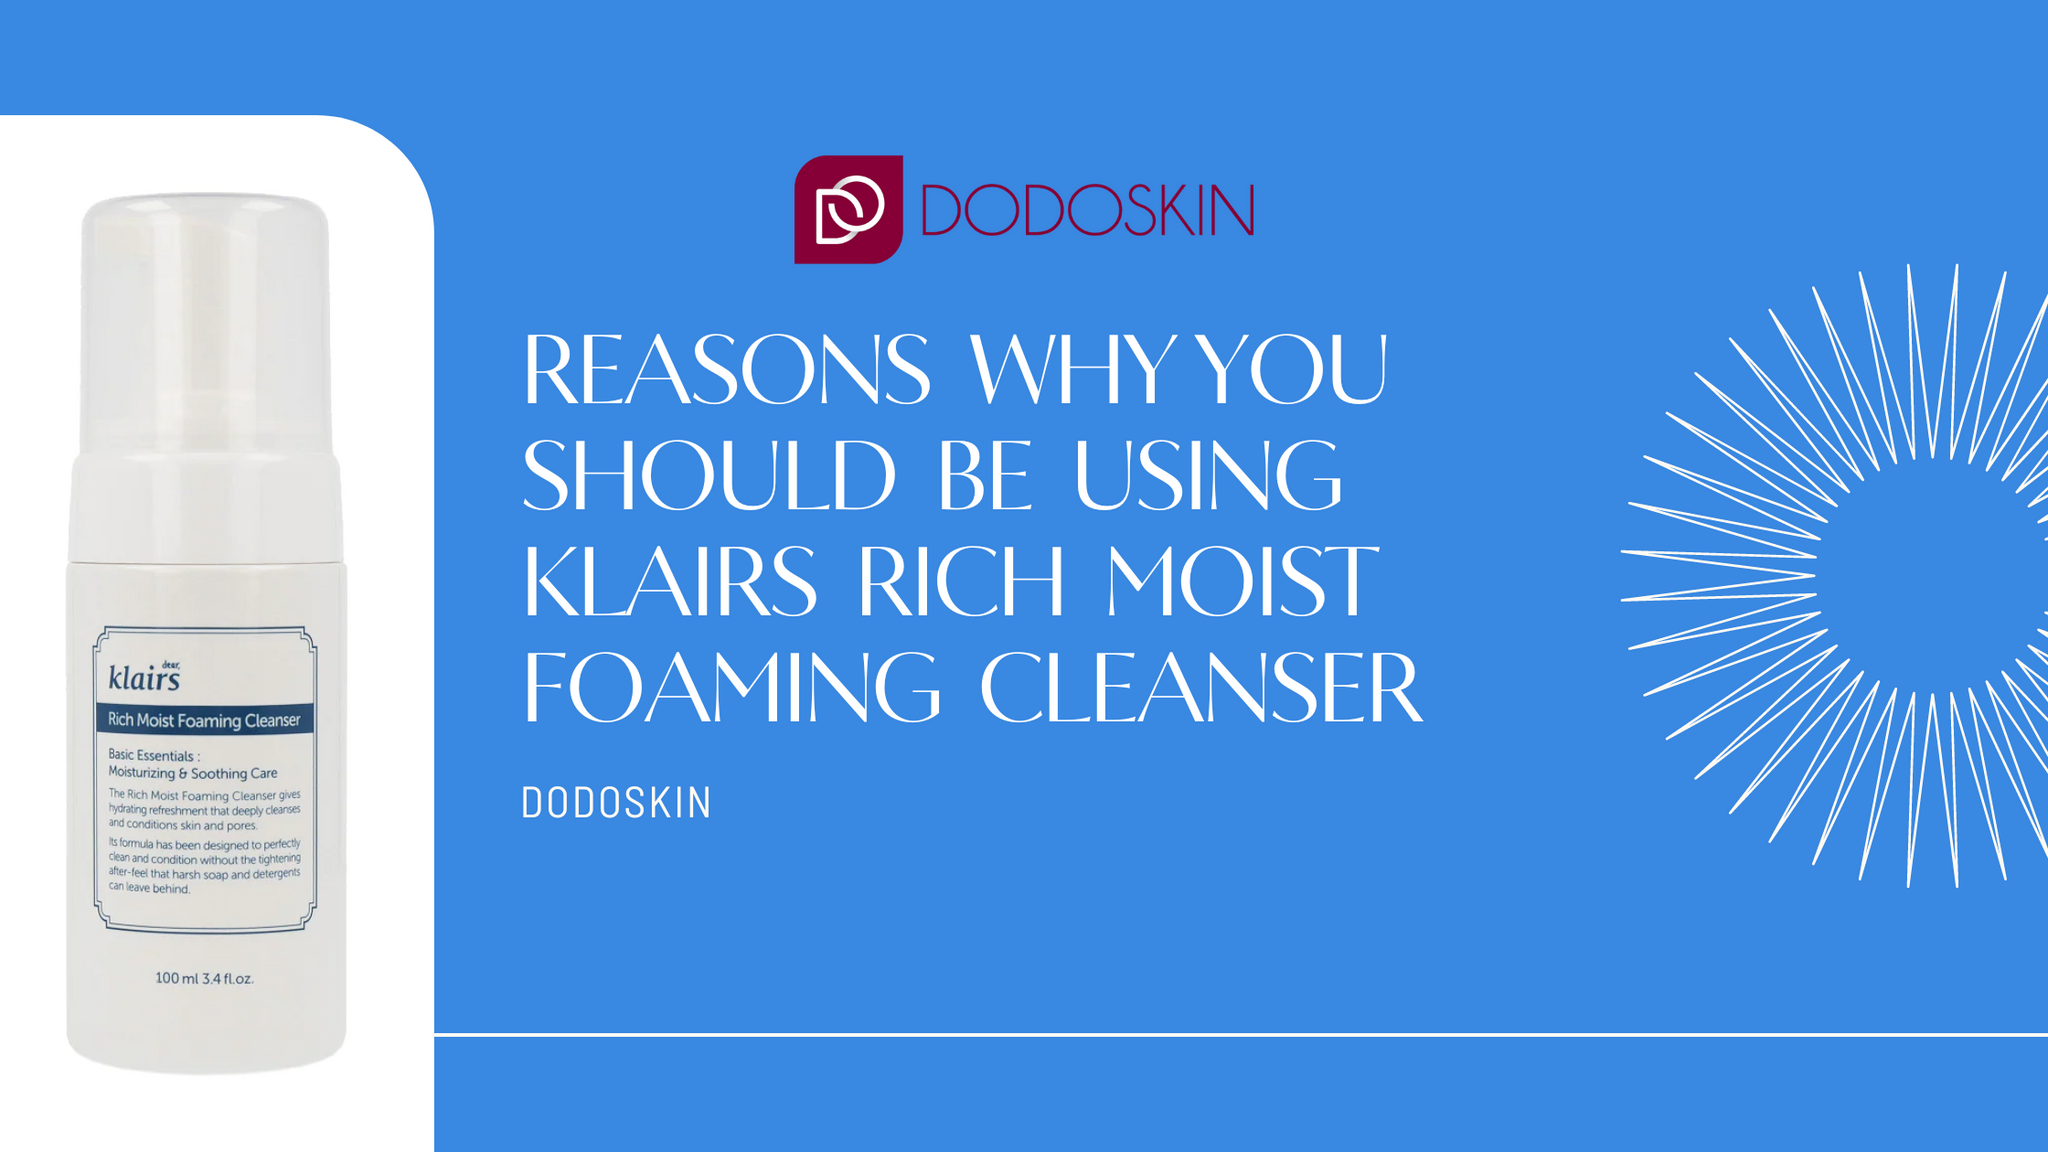 10 Reasons Why You Should Be Using This Klairs Rich Moist Foaming Cleanser